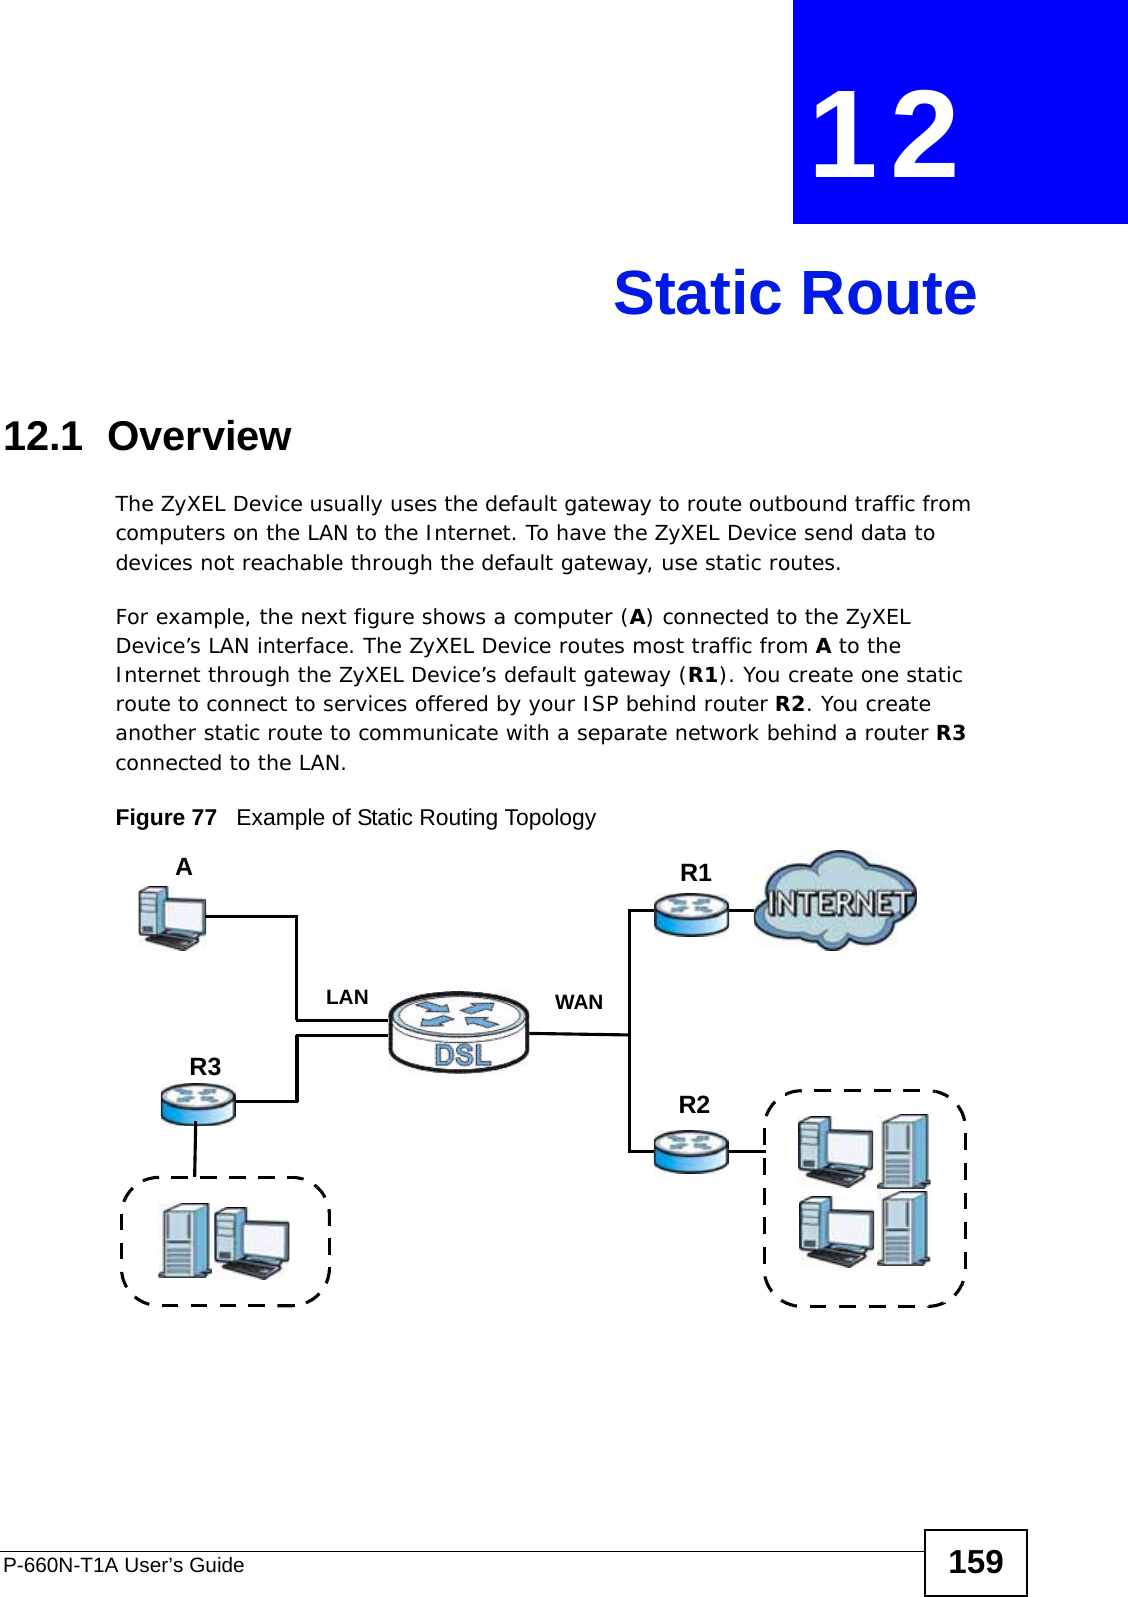 P-660N-T1A User’s Guide 159CHAPTER  12 Static Route12.1  Overview The ZyXEL Device usually uses the default gateway to route outbound traffic from computers on the LAN to the Internet. To have the ZyXEL Device send data to devices not reachable through the default gateway, use static routes.For example, the next figure shows a computer (A) connected to the ZyXEL Device’s LAN interface. The ZyXEL Device routes most traffic from A to the Internet through the ZyXEL Device’s default gateway (R1). You create one static route to connect to services offered by your ISP behind router R2. You create another static route to communicate with a separate network behind a router R3 connected to the LAN.   Figure 77   Example of Static Routing TopologyWANR1R2AR3LAN